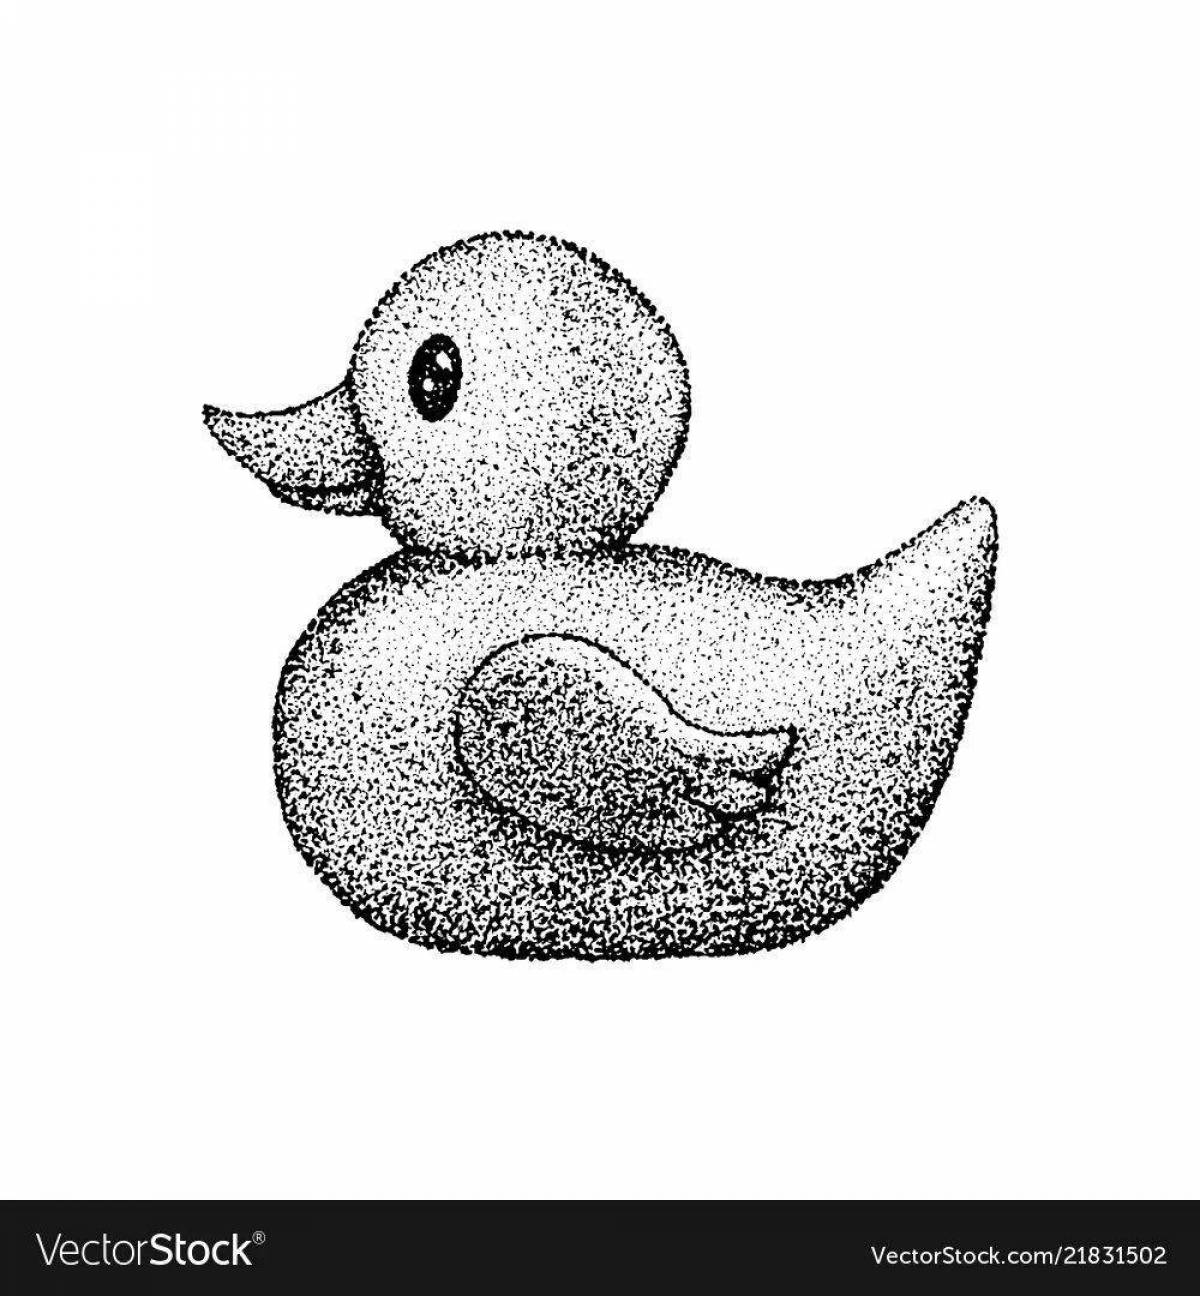 Humorous rubber duck coloring book